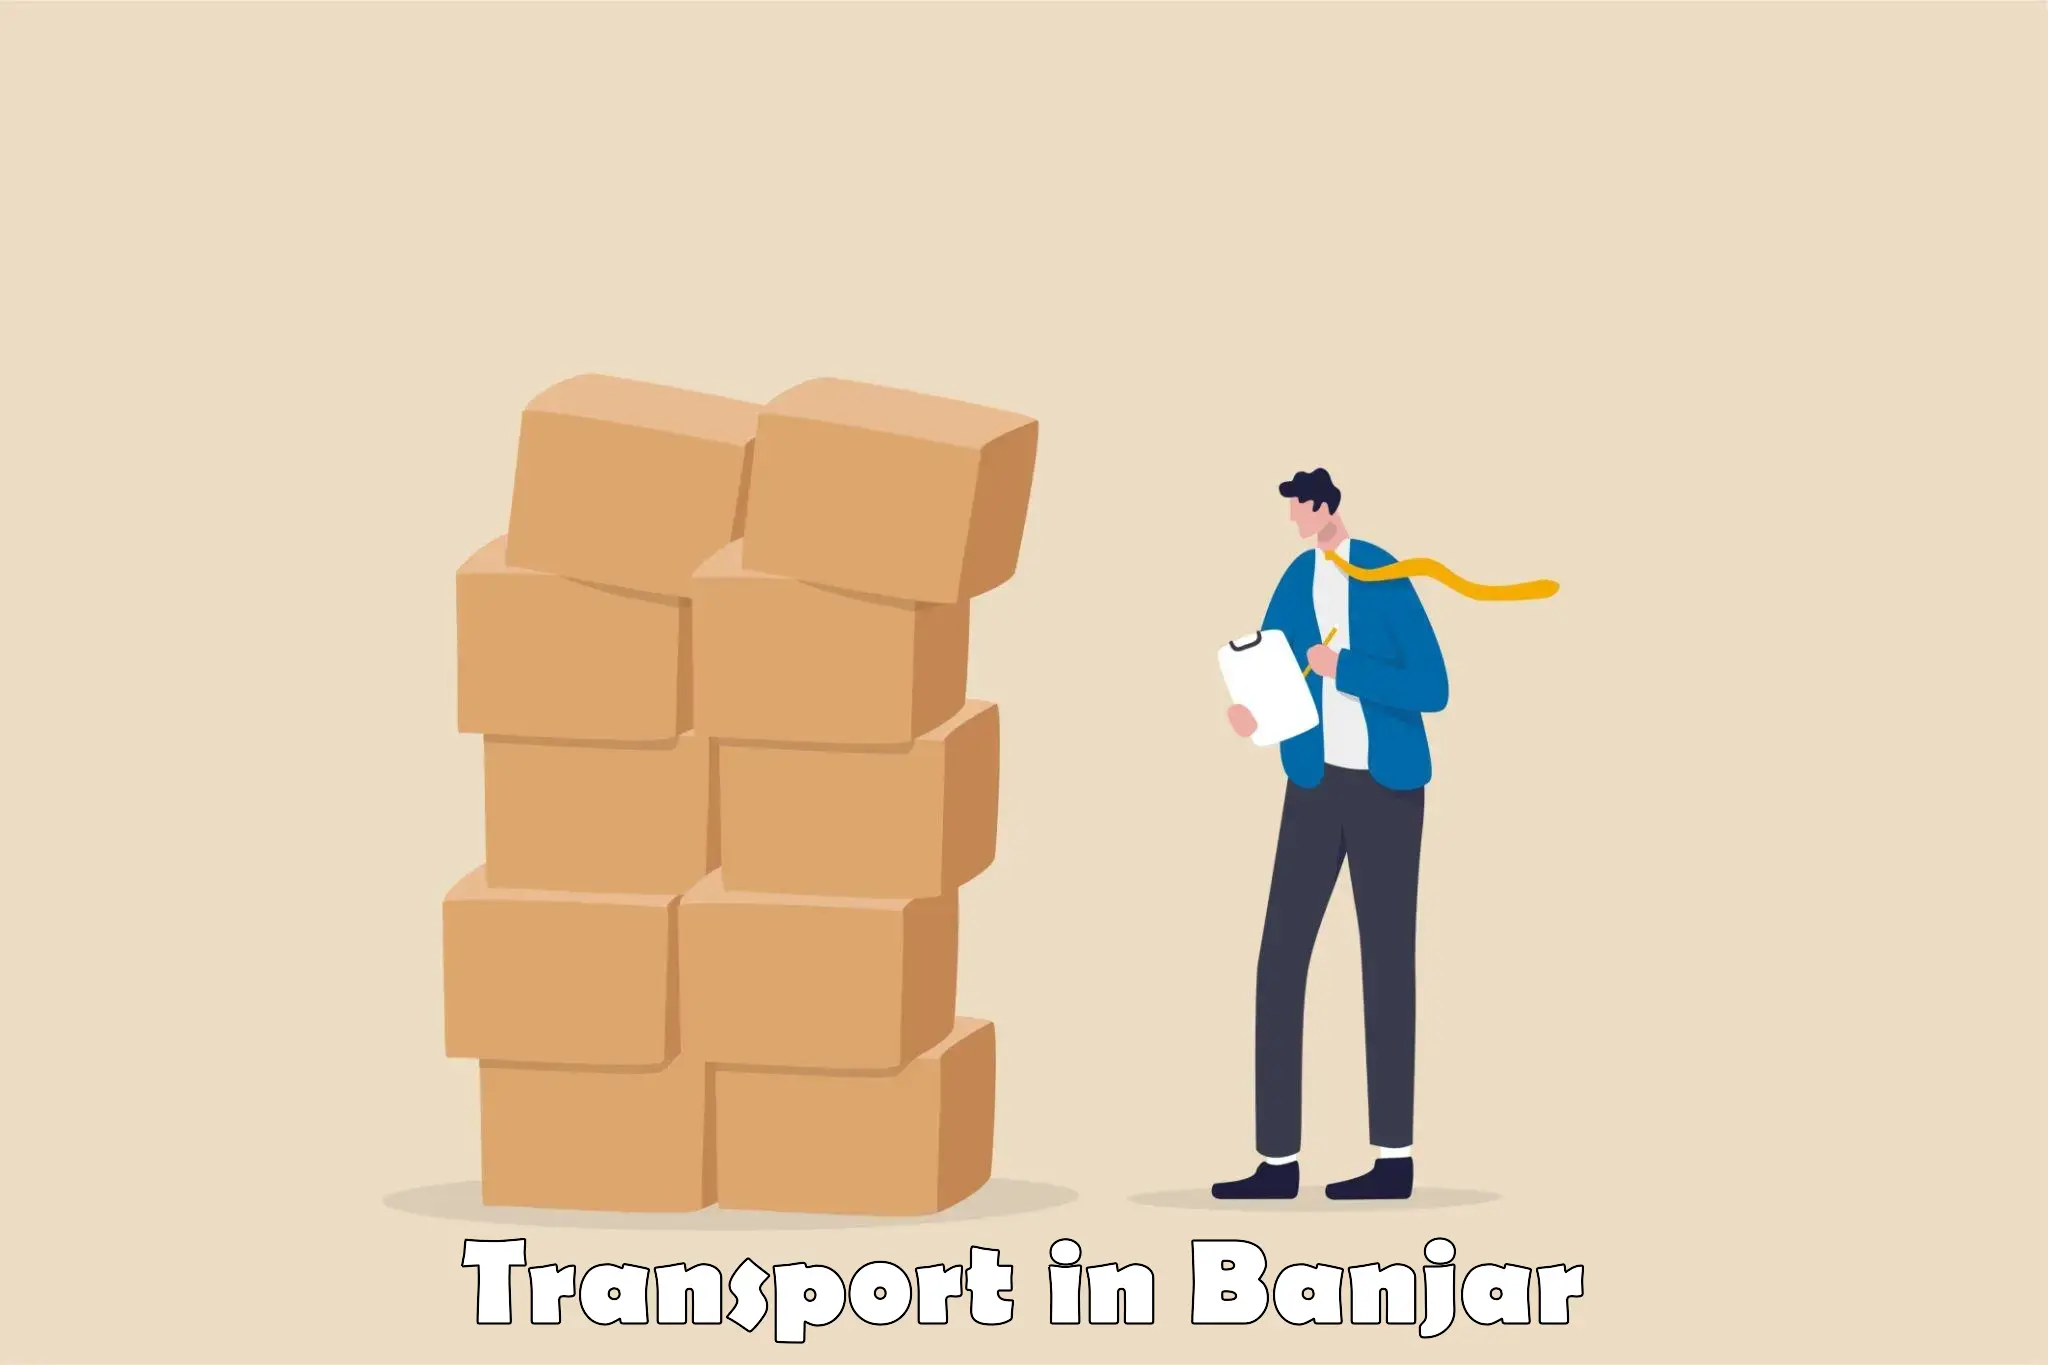 Transport shared services in Banjar